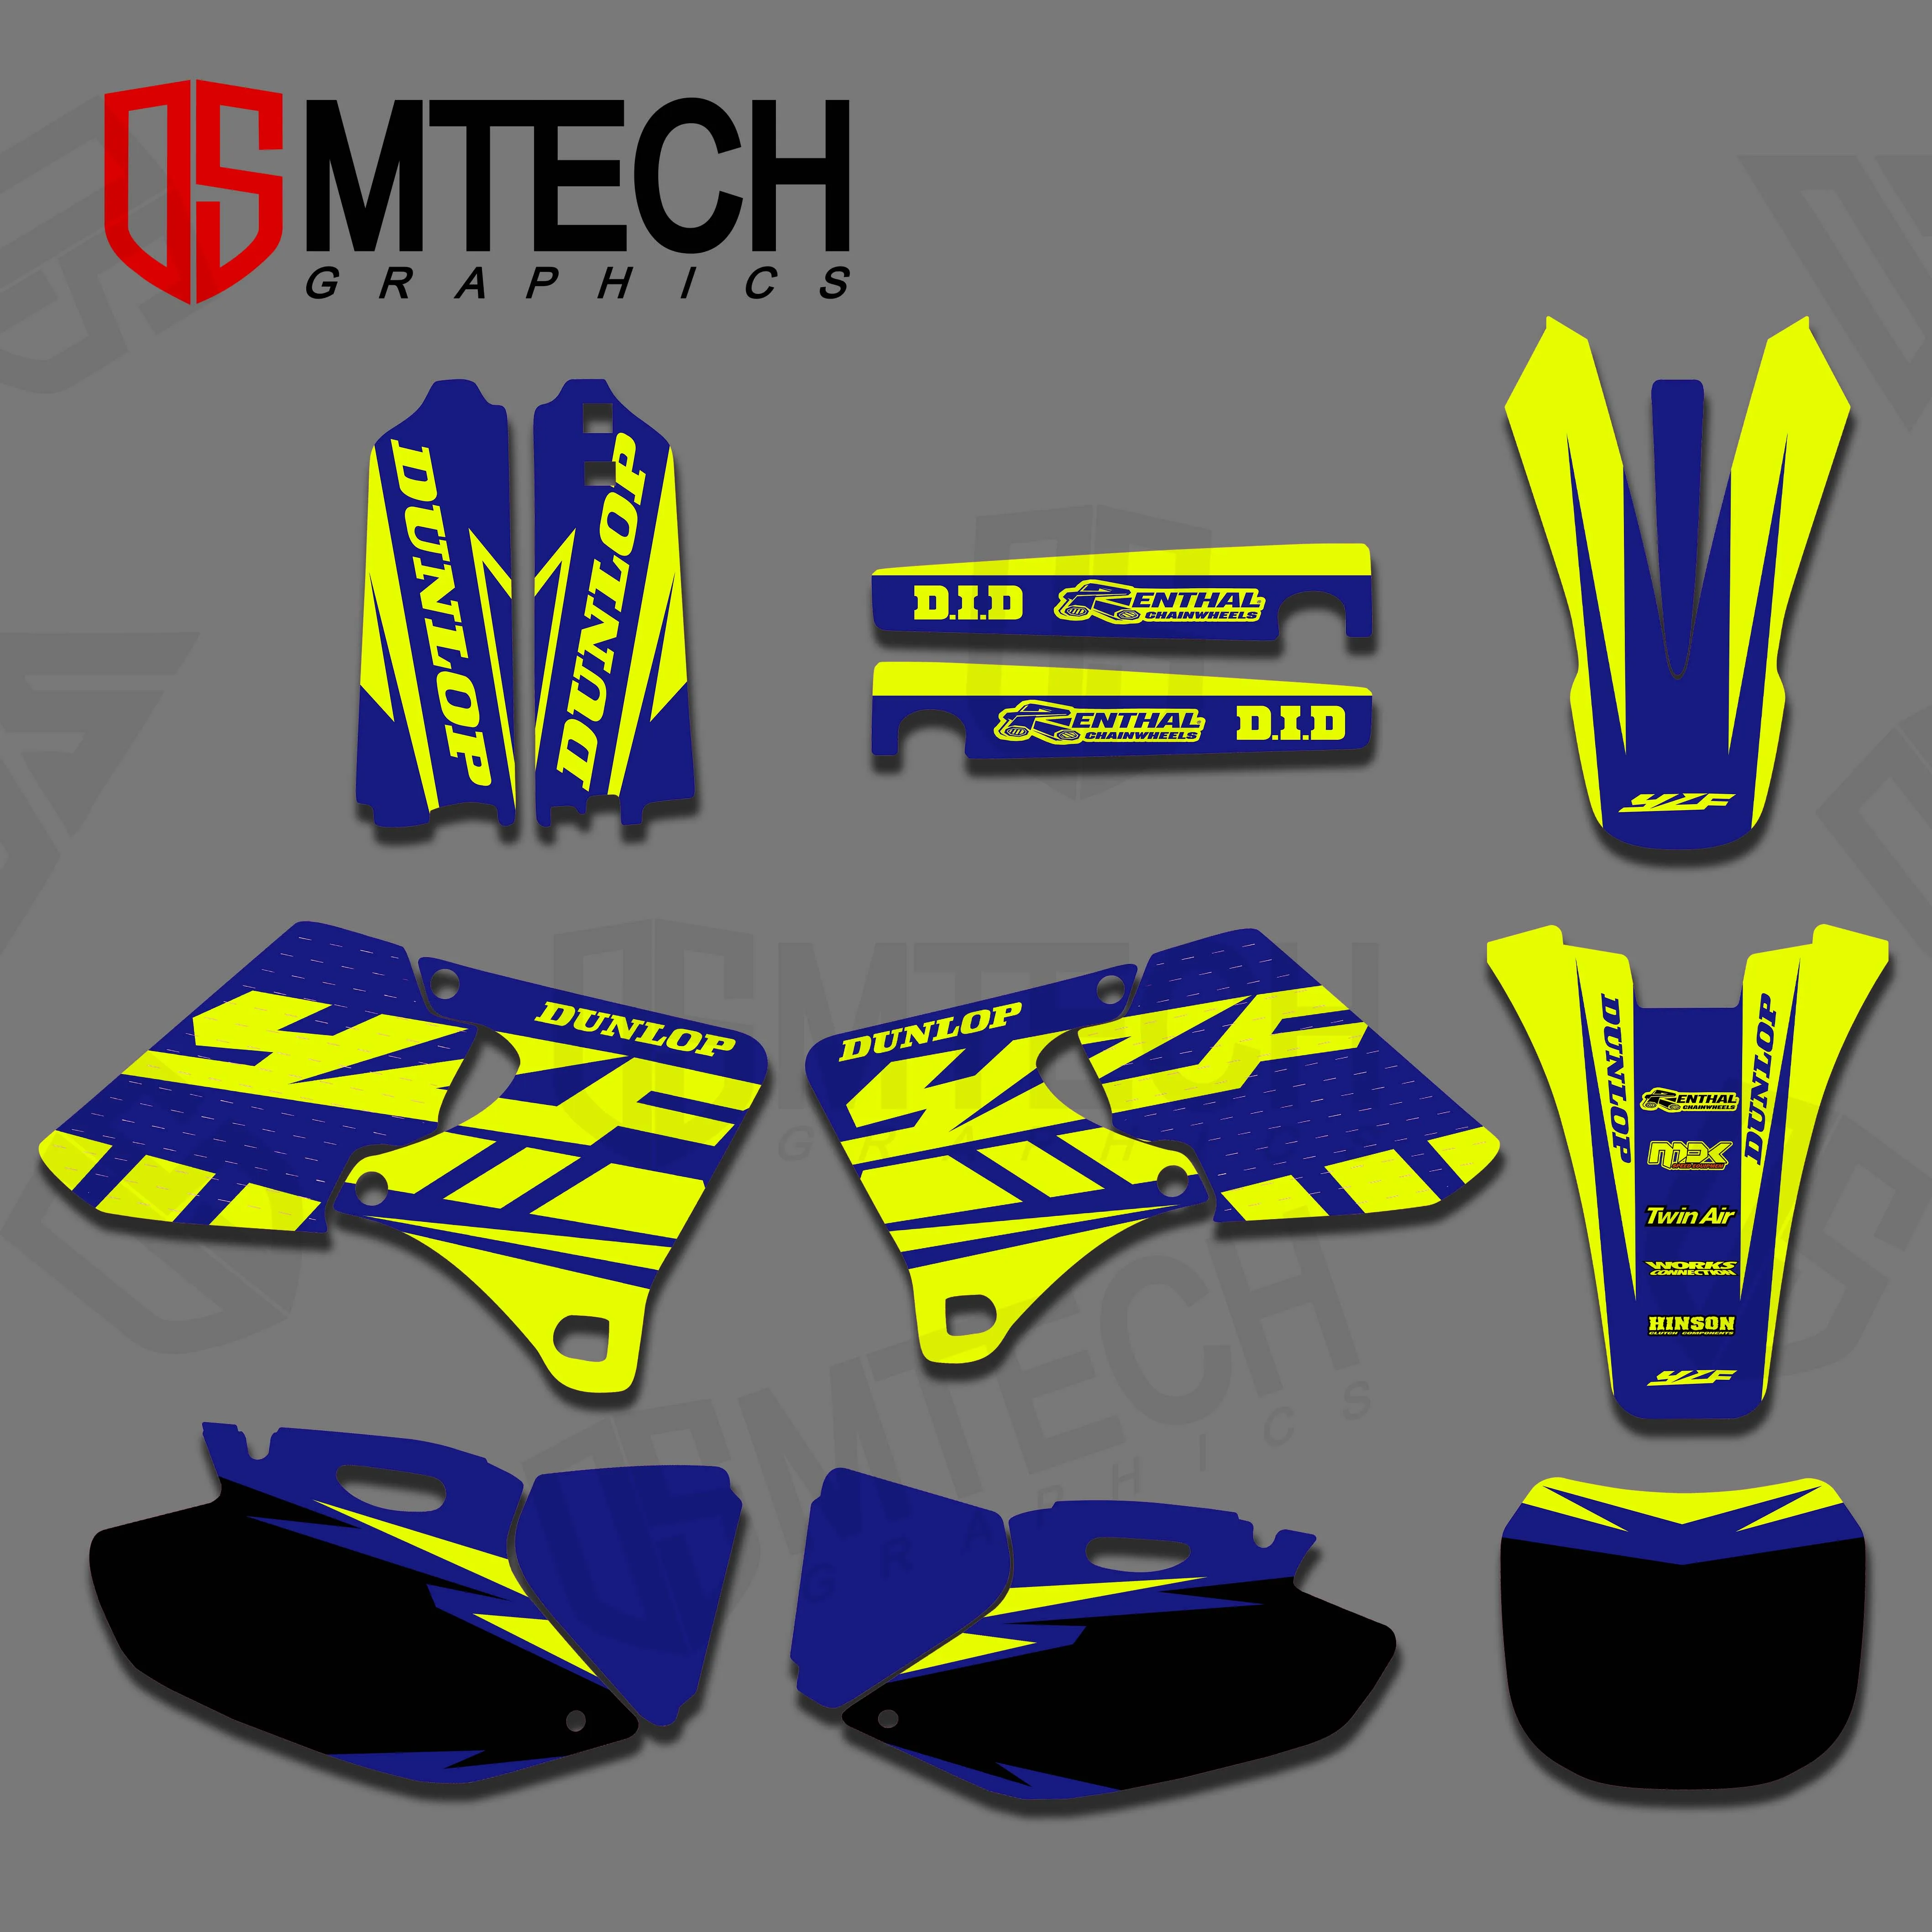 DSMTECH GRAPHICS & BACKGROUNDS DECALS STICKERS Kits for Yamaha YZ250F YZ400F YZ426F YZF 250F 400F 426F 1998 1999 2000 2001 2002 цепь грм для yamaha 250f wr250f yz250f wr yz 250f 2001 2013 замена 94591 53114 00